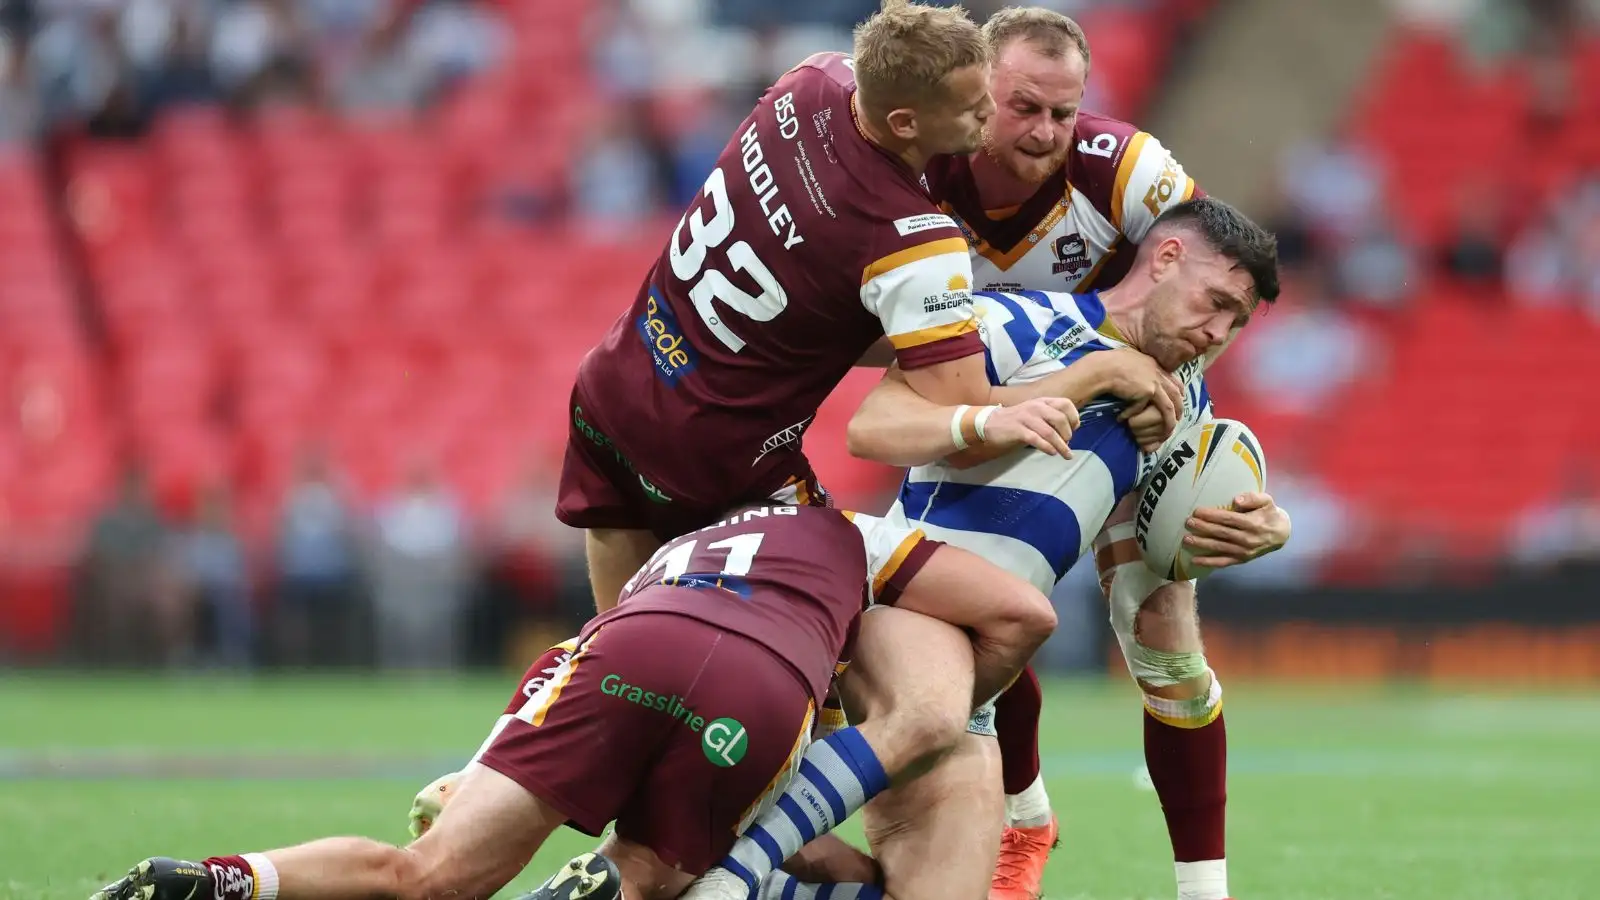 WATCH: ‘One of the greatest tries in Wembley history’ as Batley Bulldogs produce 14-pass effort in 1895 Cup final